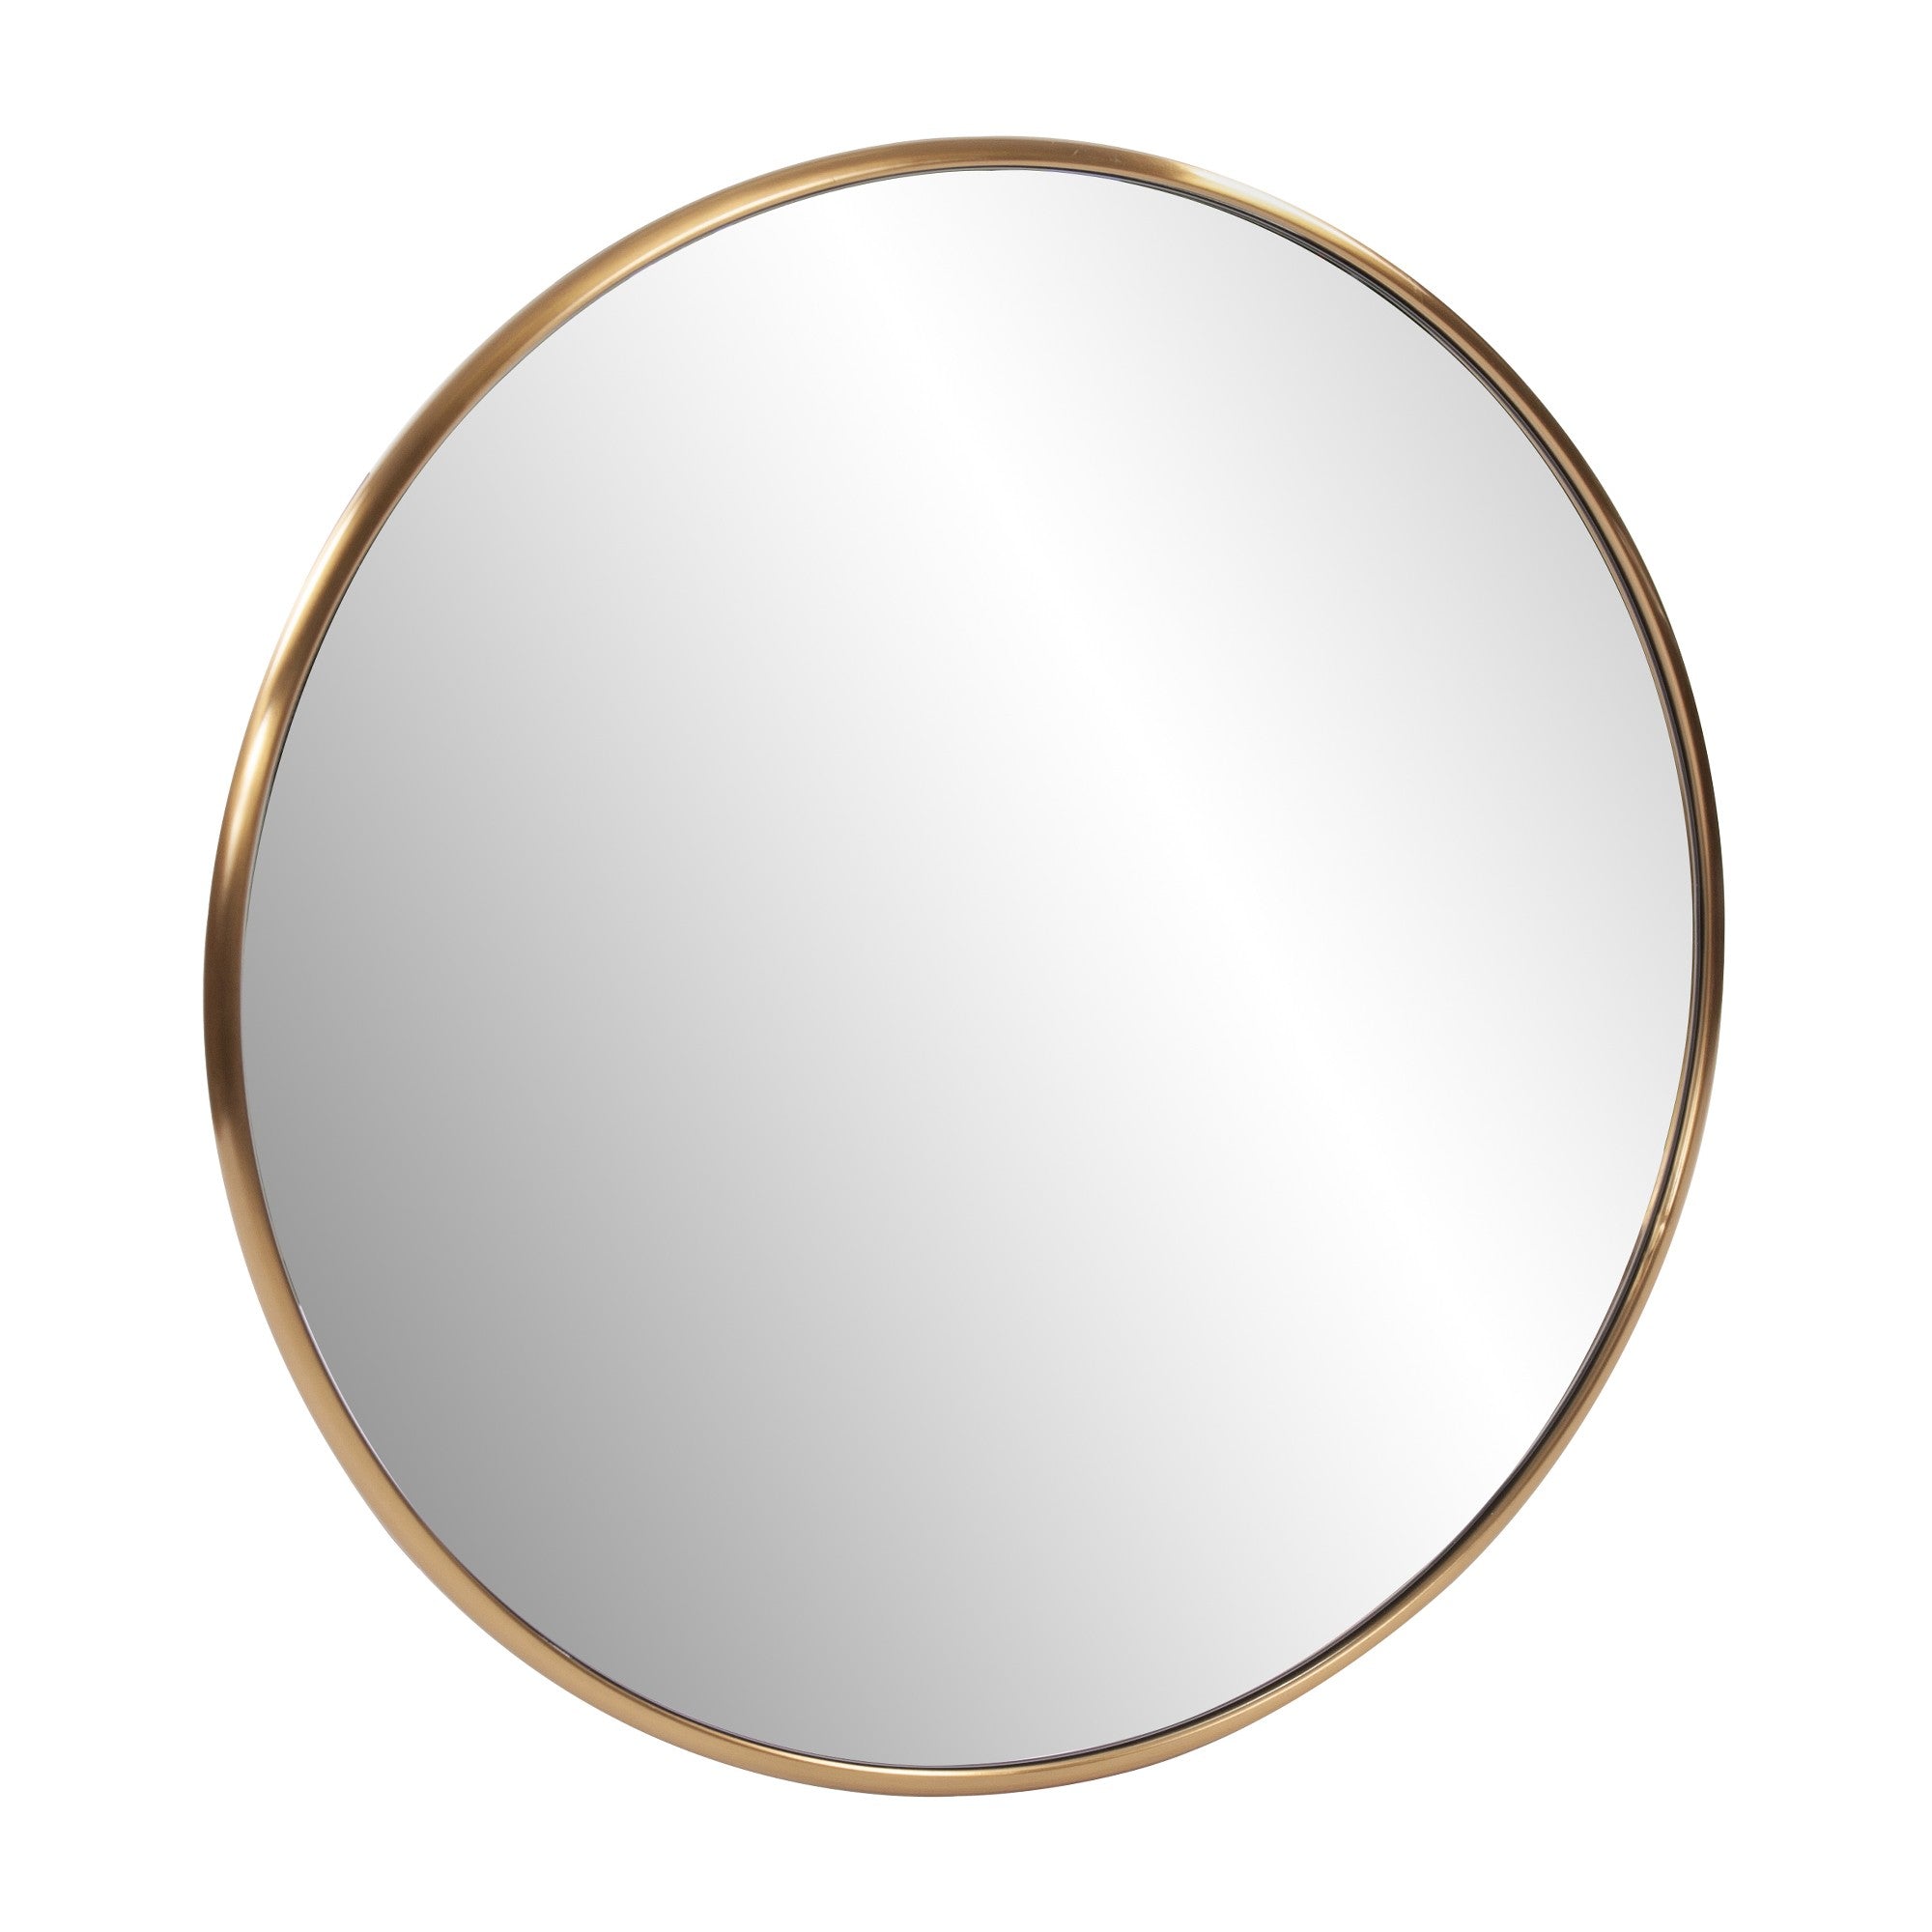 32" Antiqued Brushed Brass Round Wall Mirror